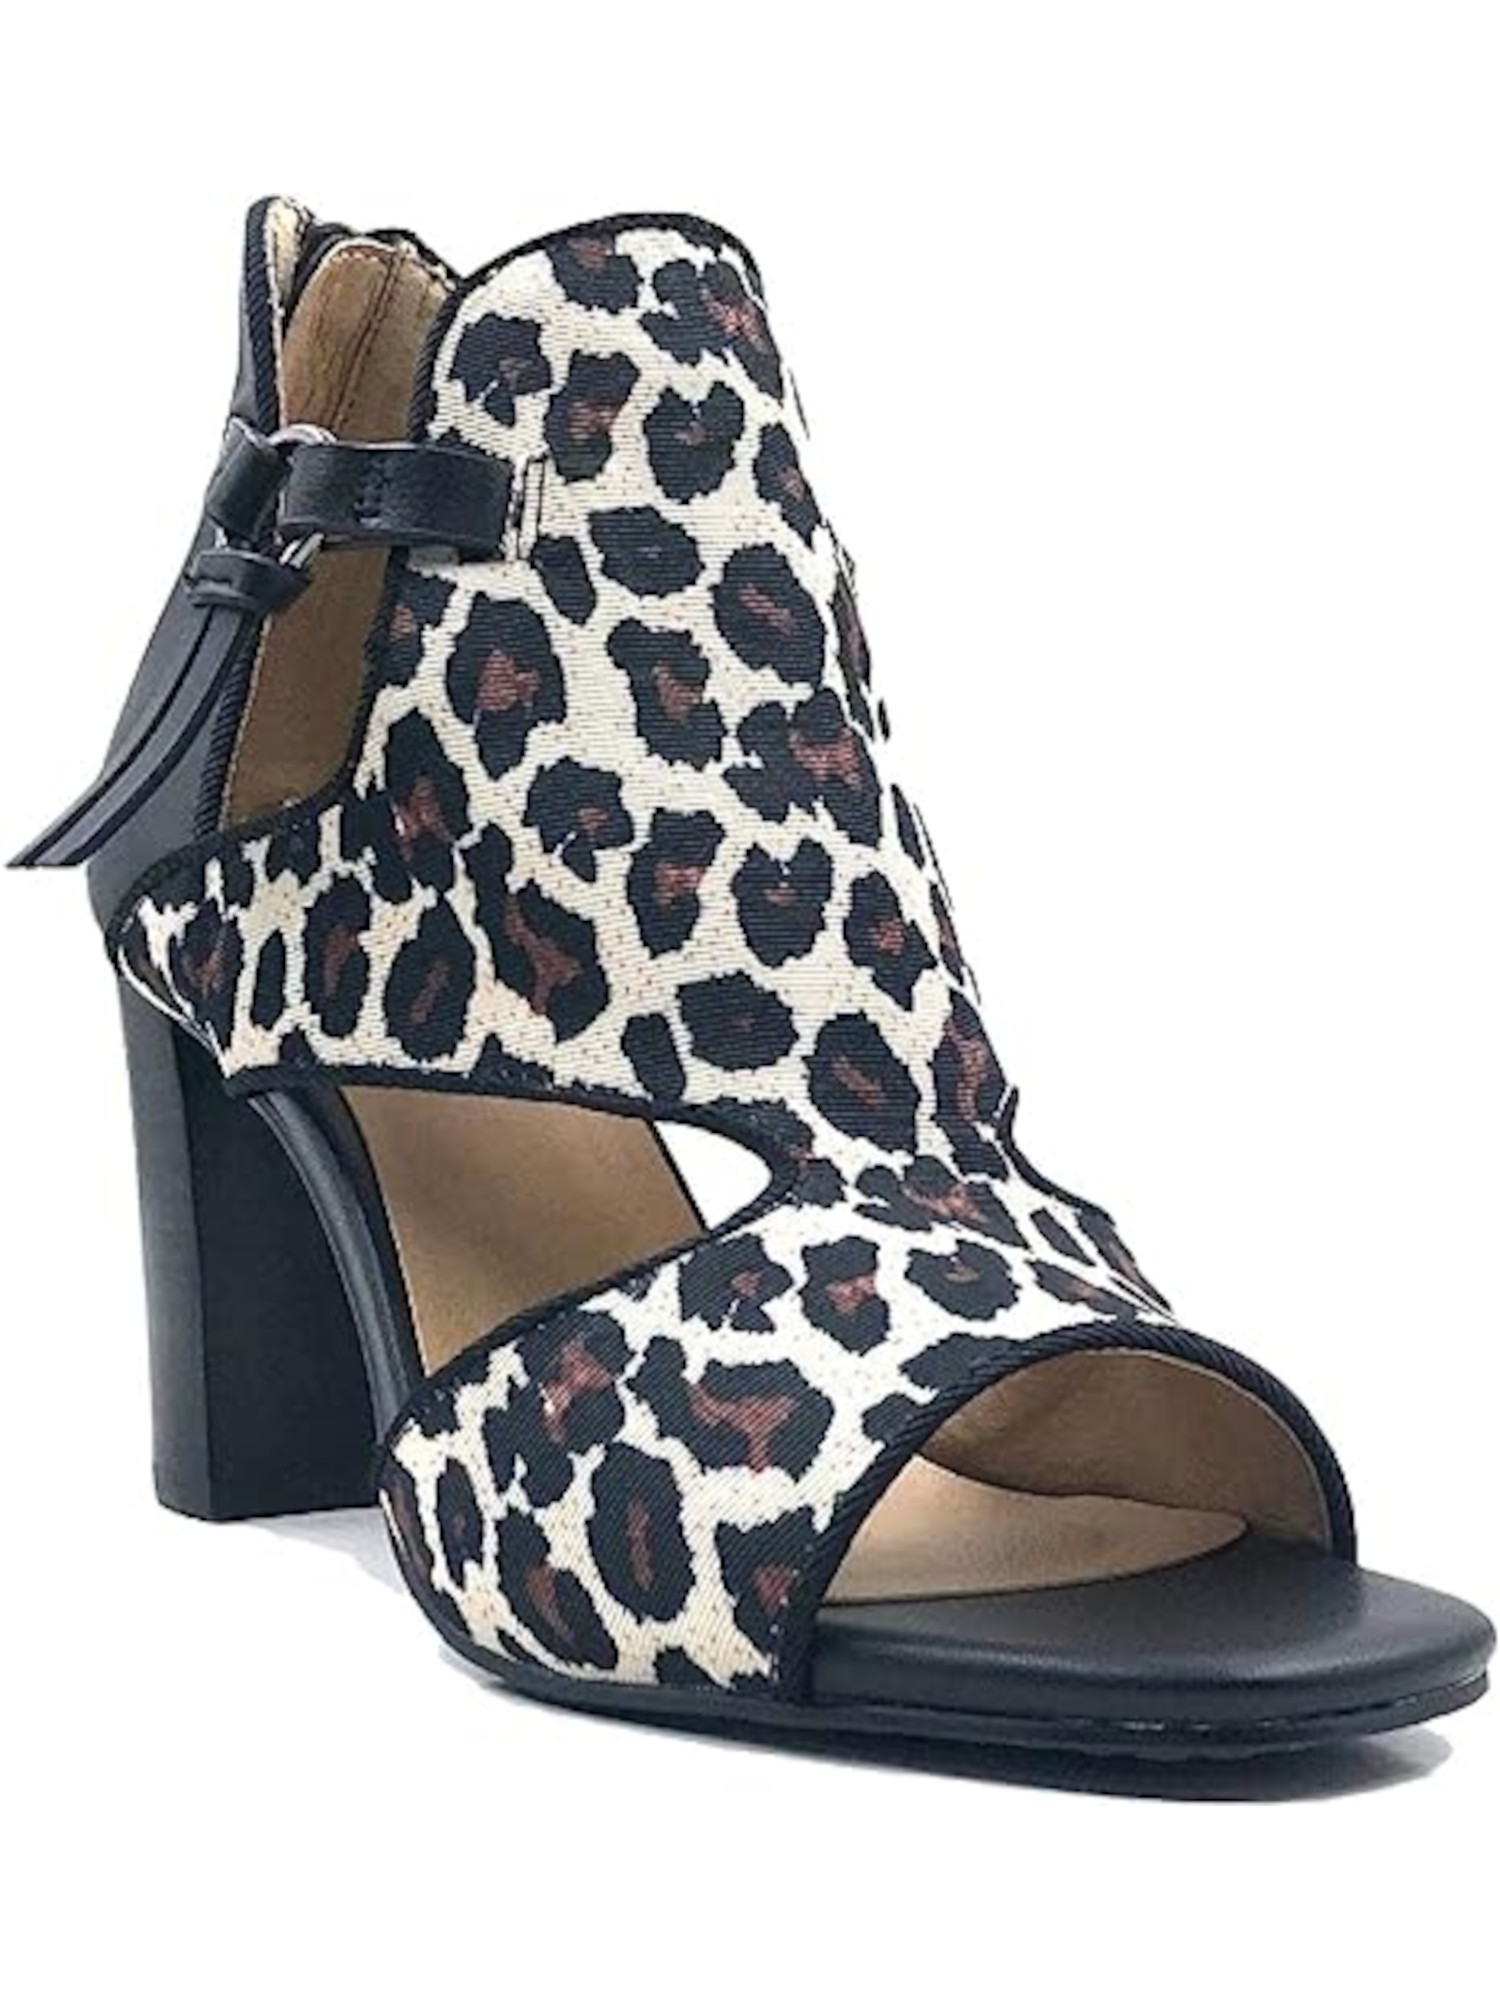 JANE AND THE SHOE Womens Ivory Leopard Print Breathable Comfort Isabelle Round Toe Block Heel Zip-Up Dress Sandals Shoes 6